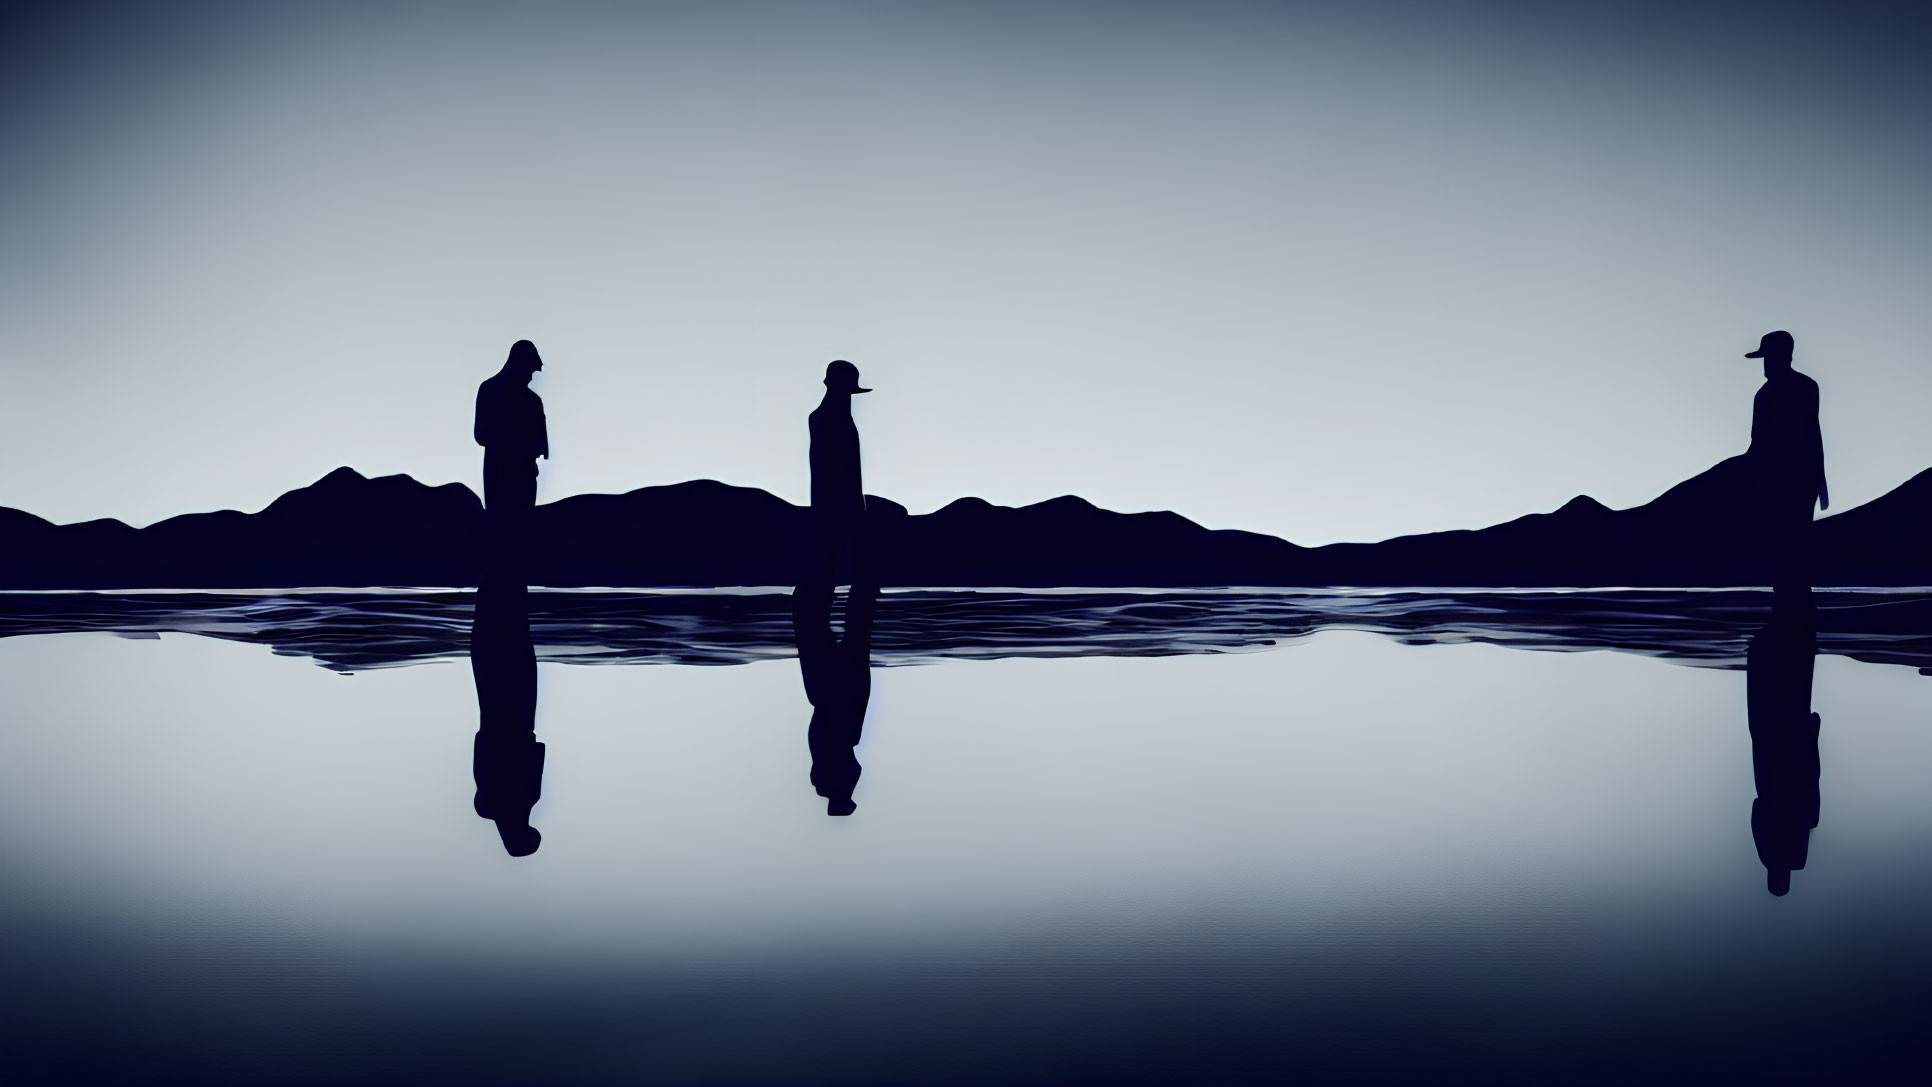 Silhouetted figures by calm water with mountain reflections in blue tones